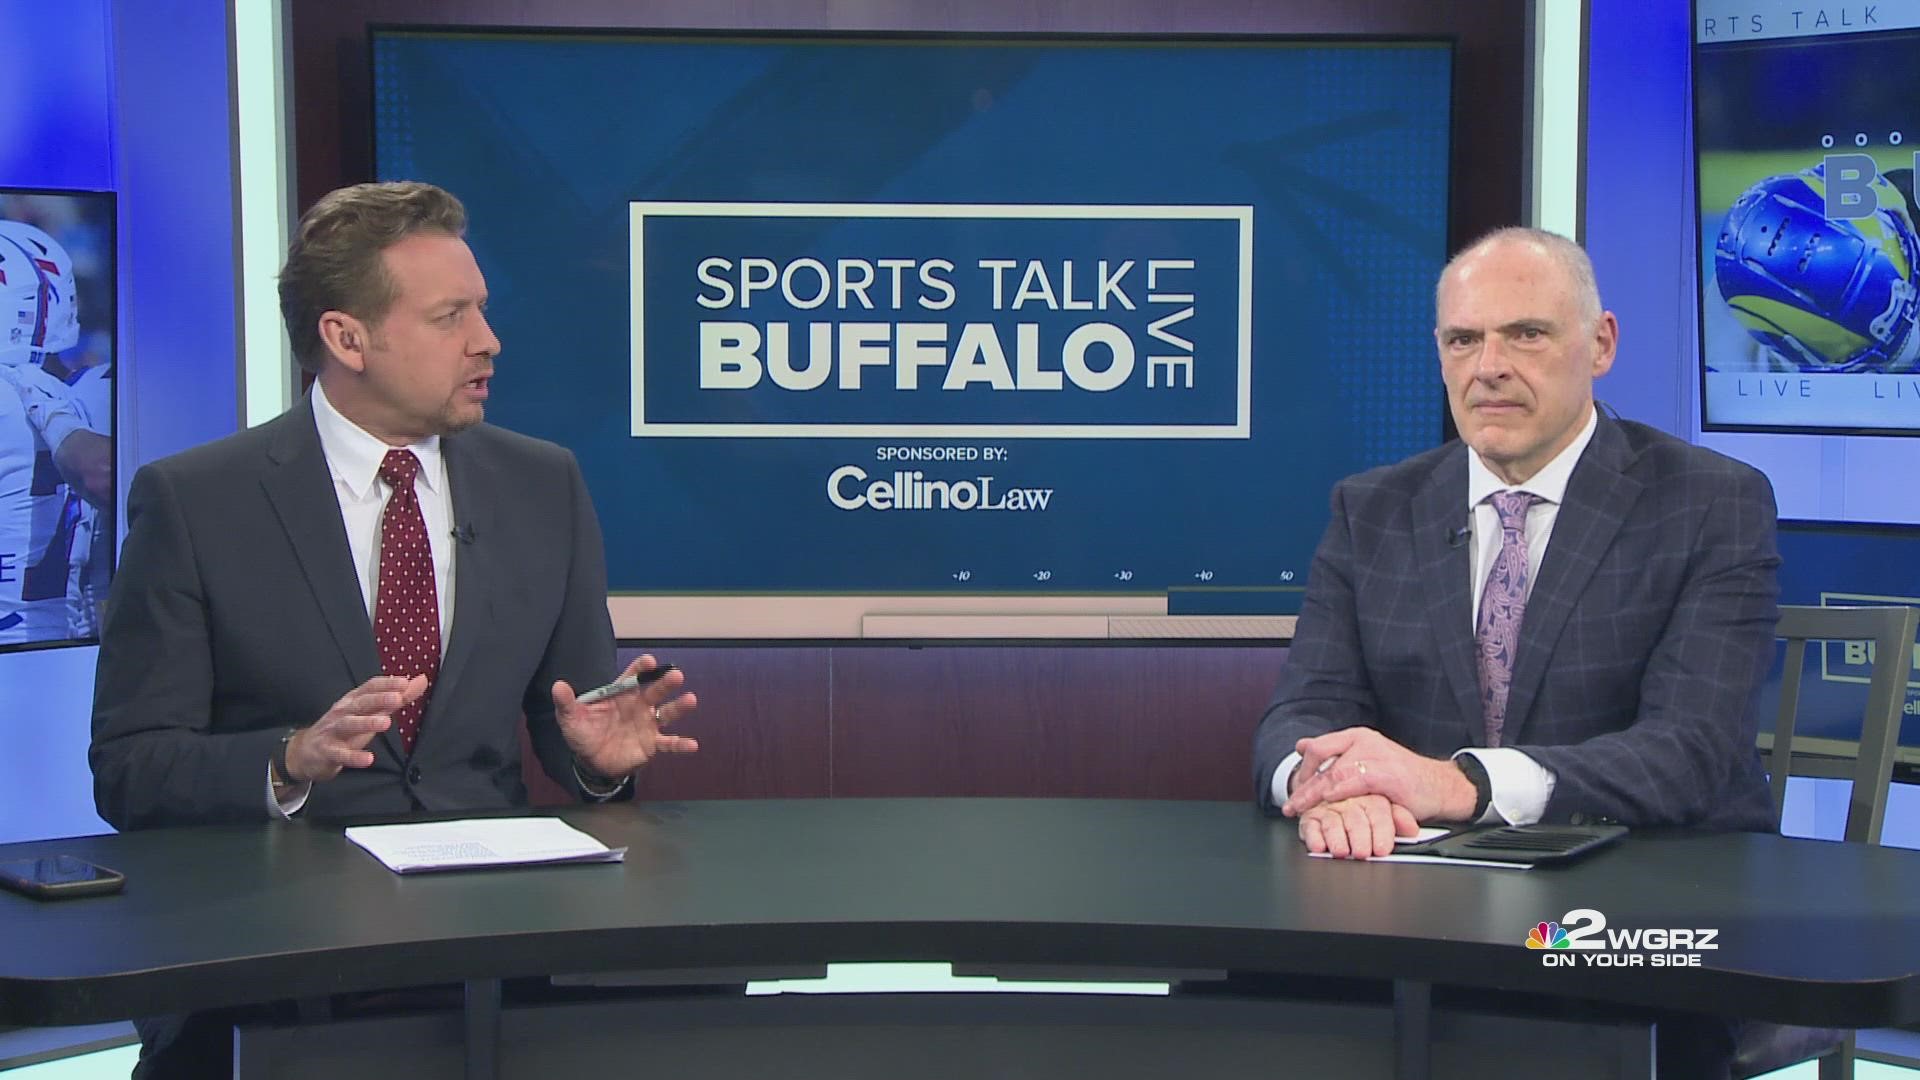 Channel 2 Sports Director Adam Benigni and WGRZ Bills/NFL Insider Vic Carucci look ahead to Sunday's Bills-Bengals AFC Divisional playoff game in Orchard Park.